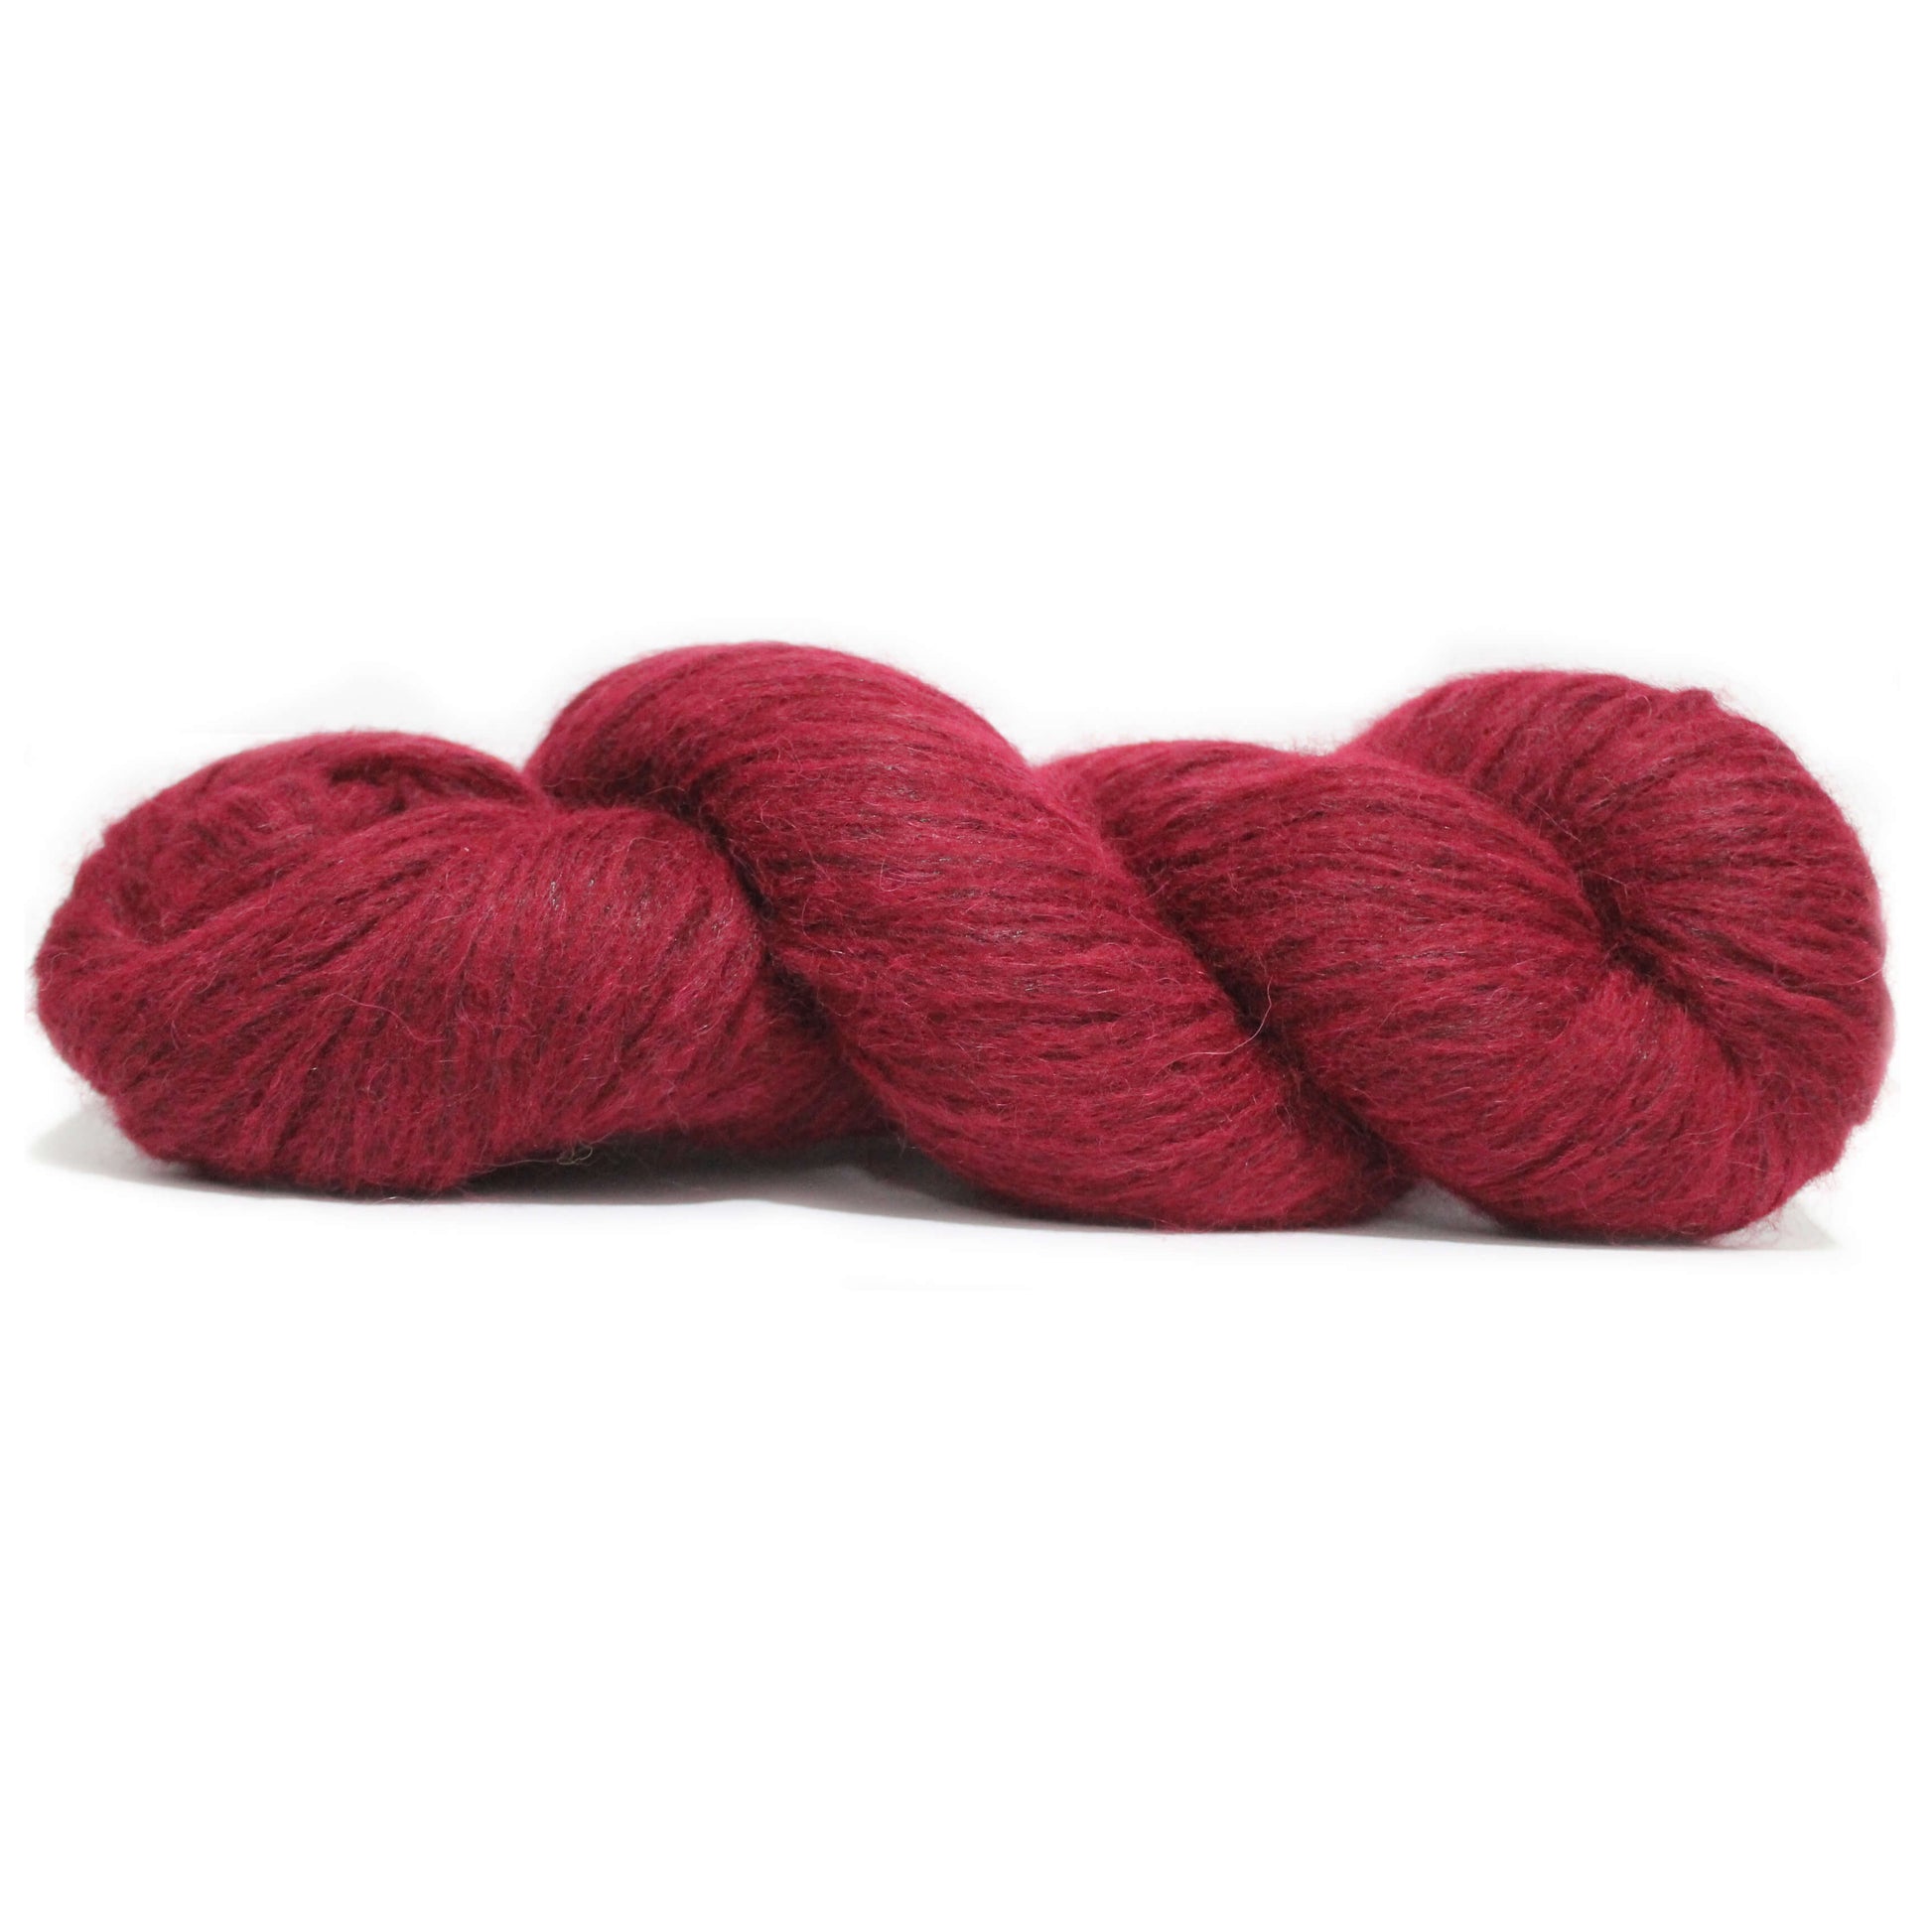 Red Baby Alpaca Yarn for Crocheting or Knitting/ INDIECITA Double